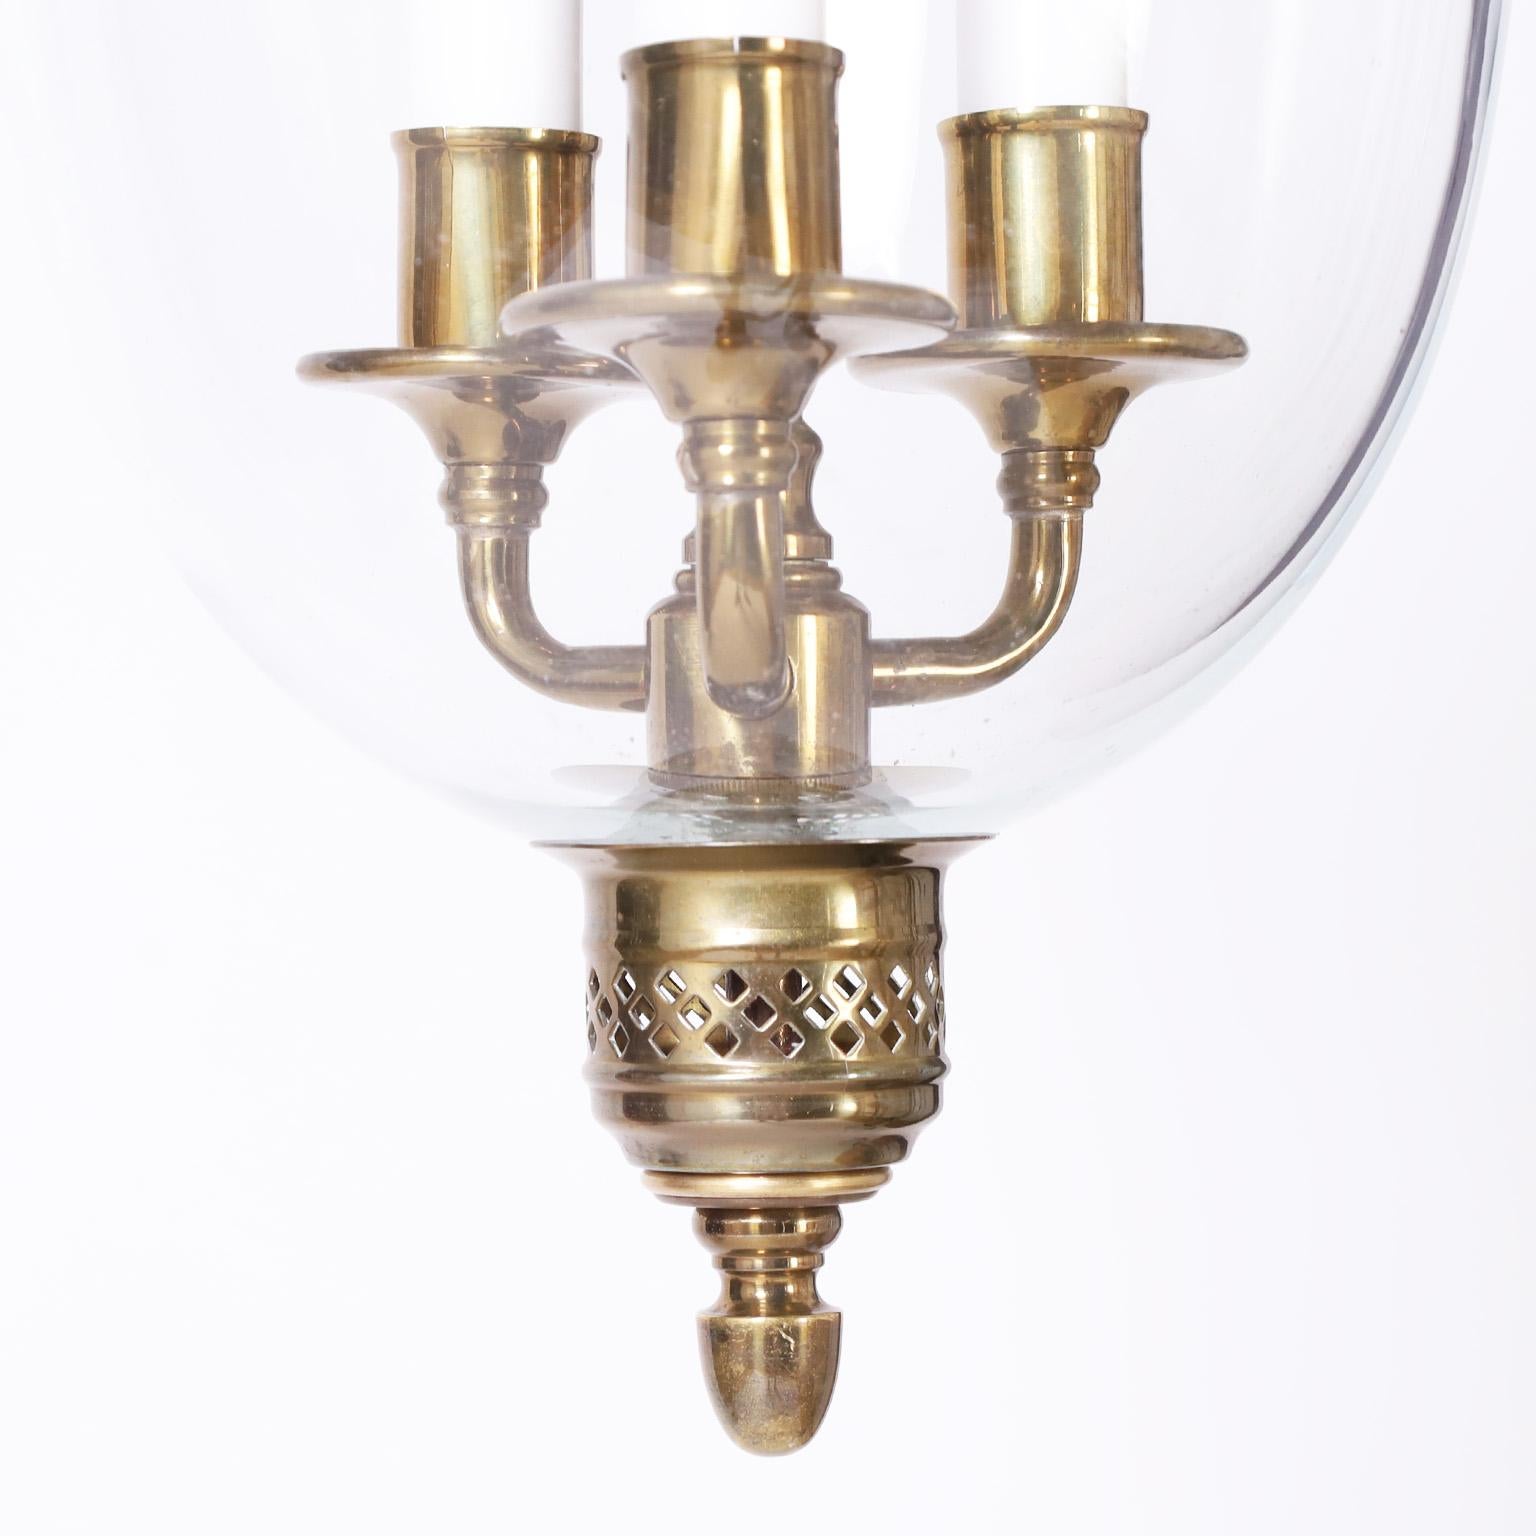 Hand-Crafted British Colonial Style Glass Lantern or Pendant For Sale